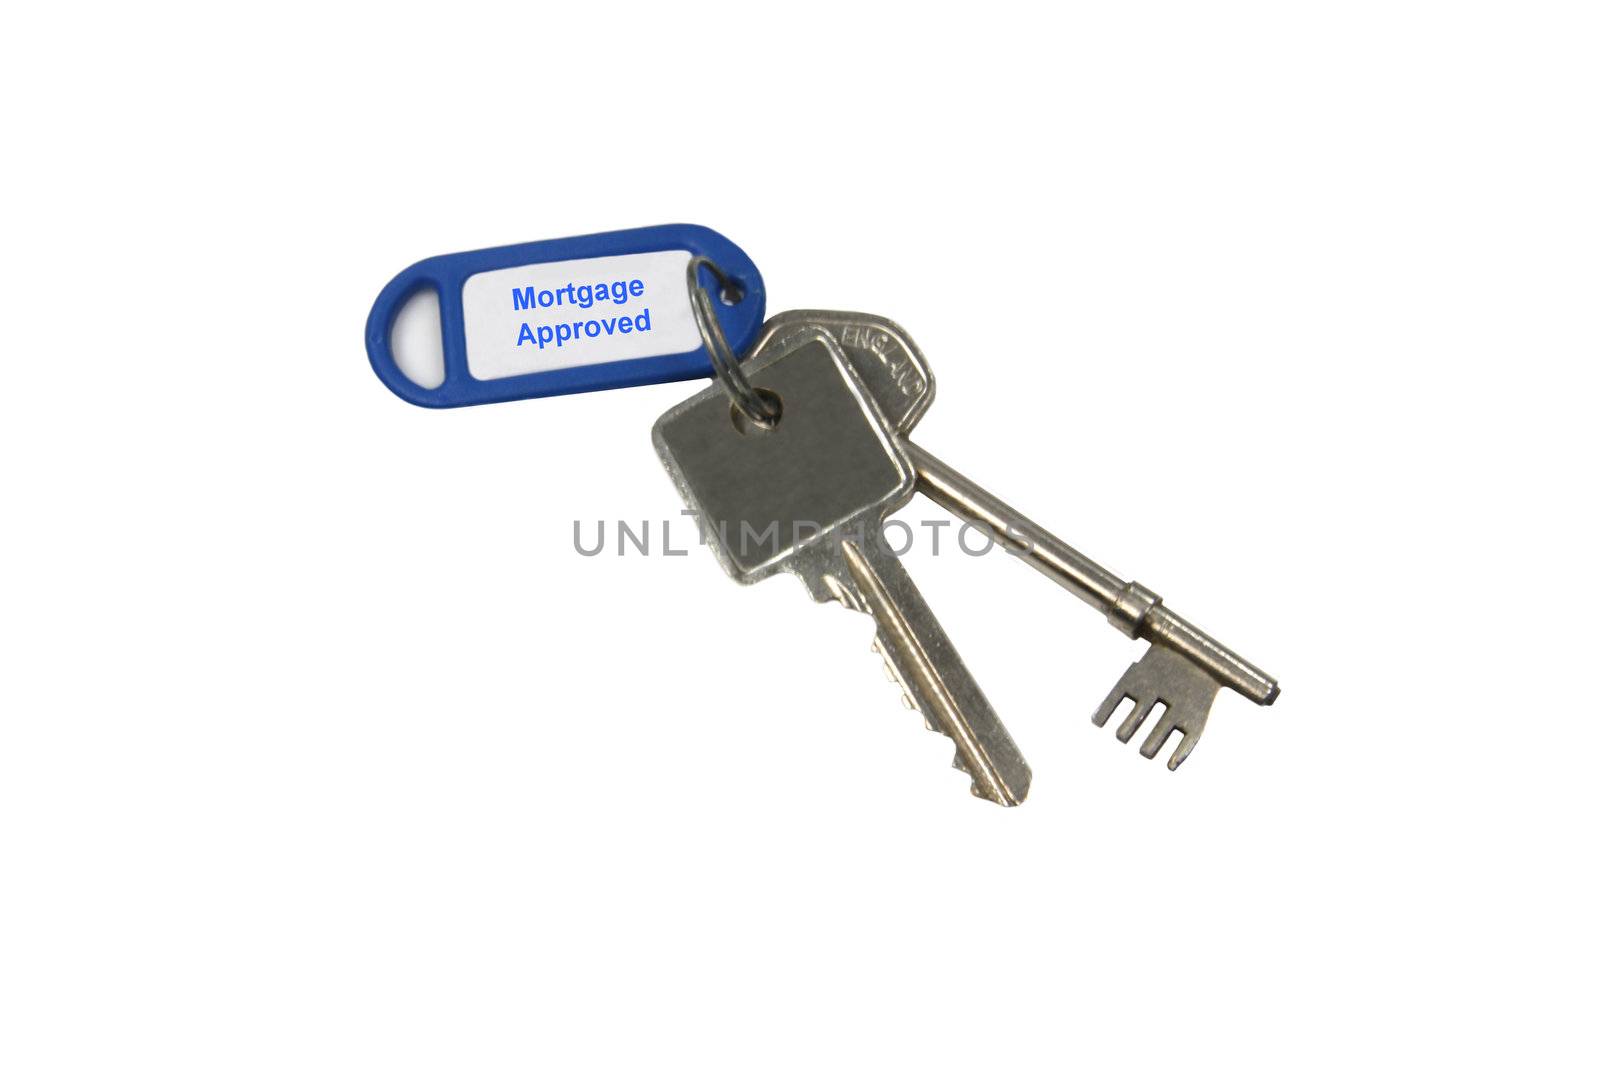 House keys mortgage approved concept isoalted macro